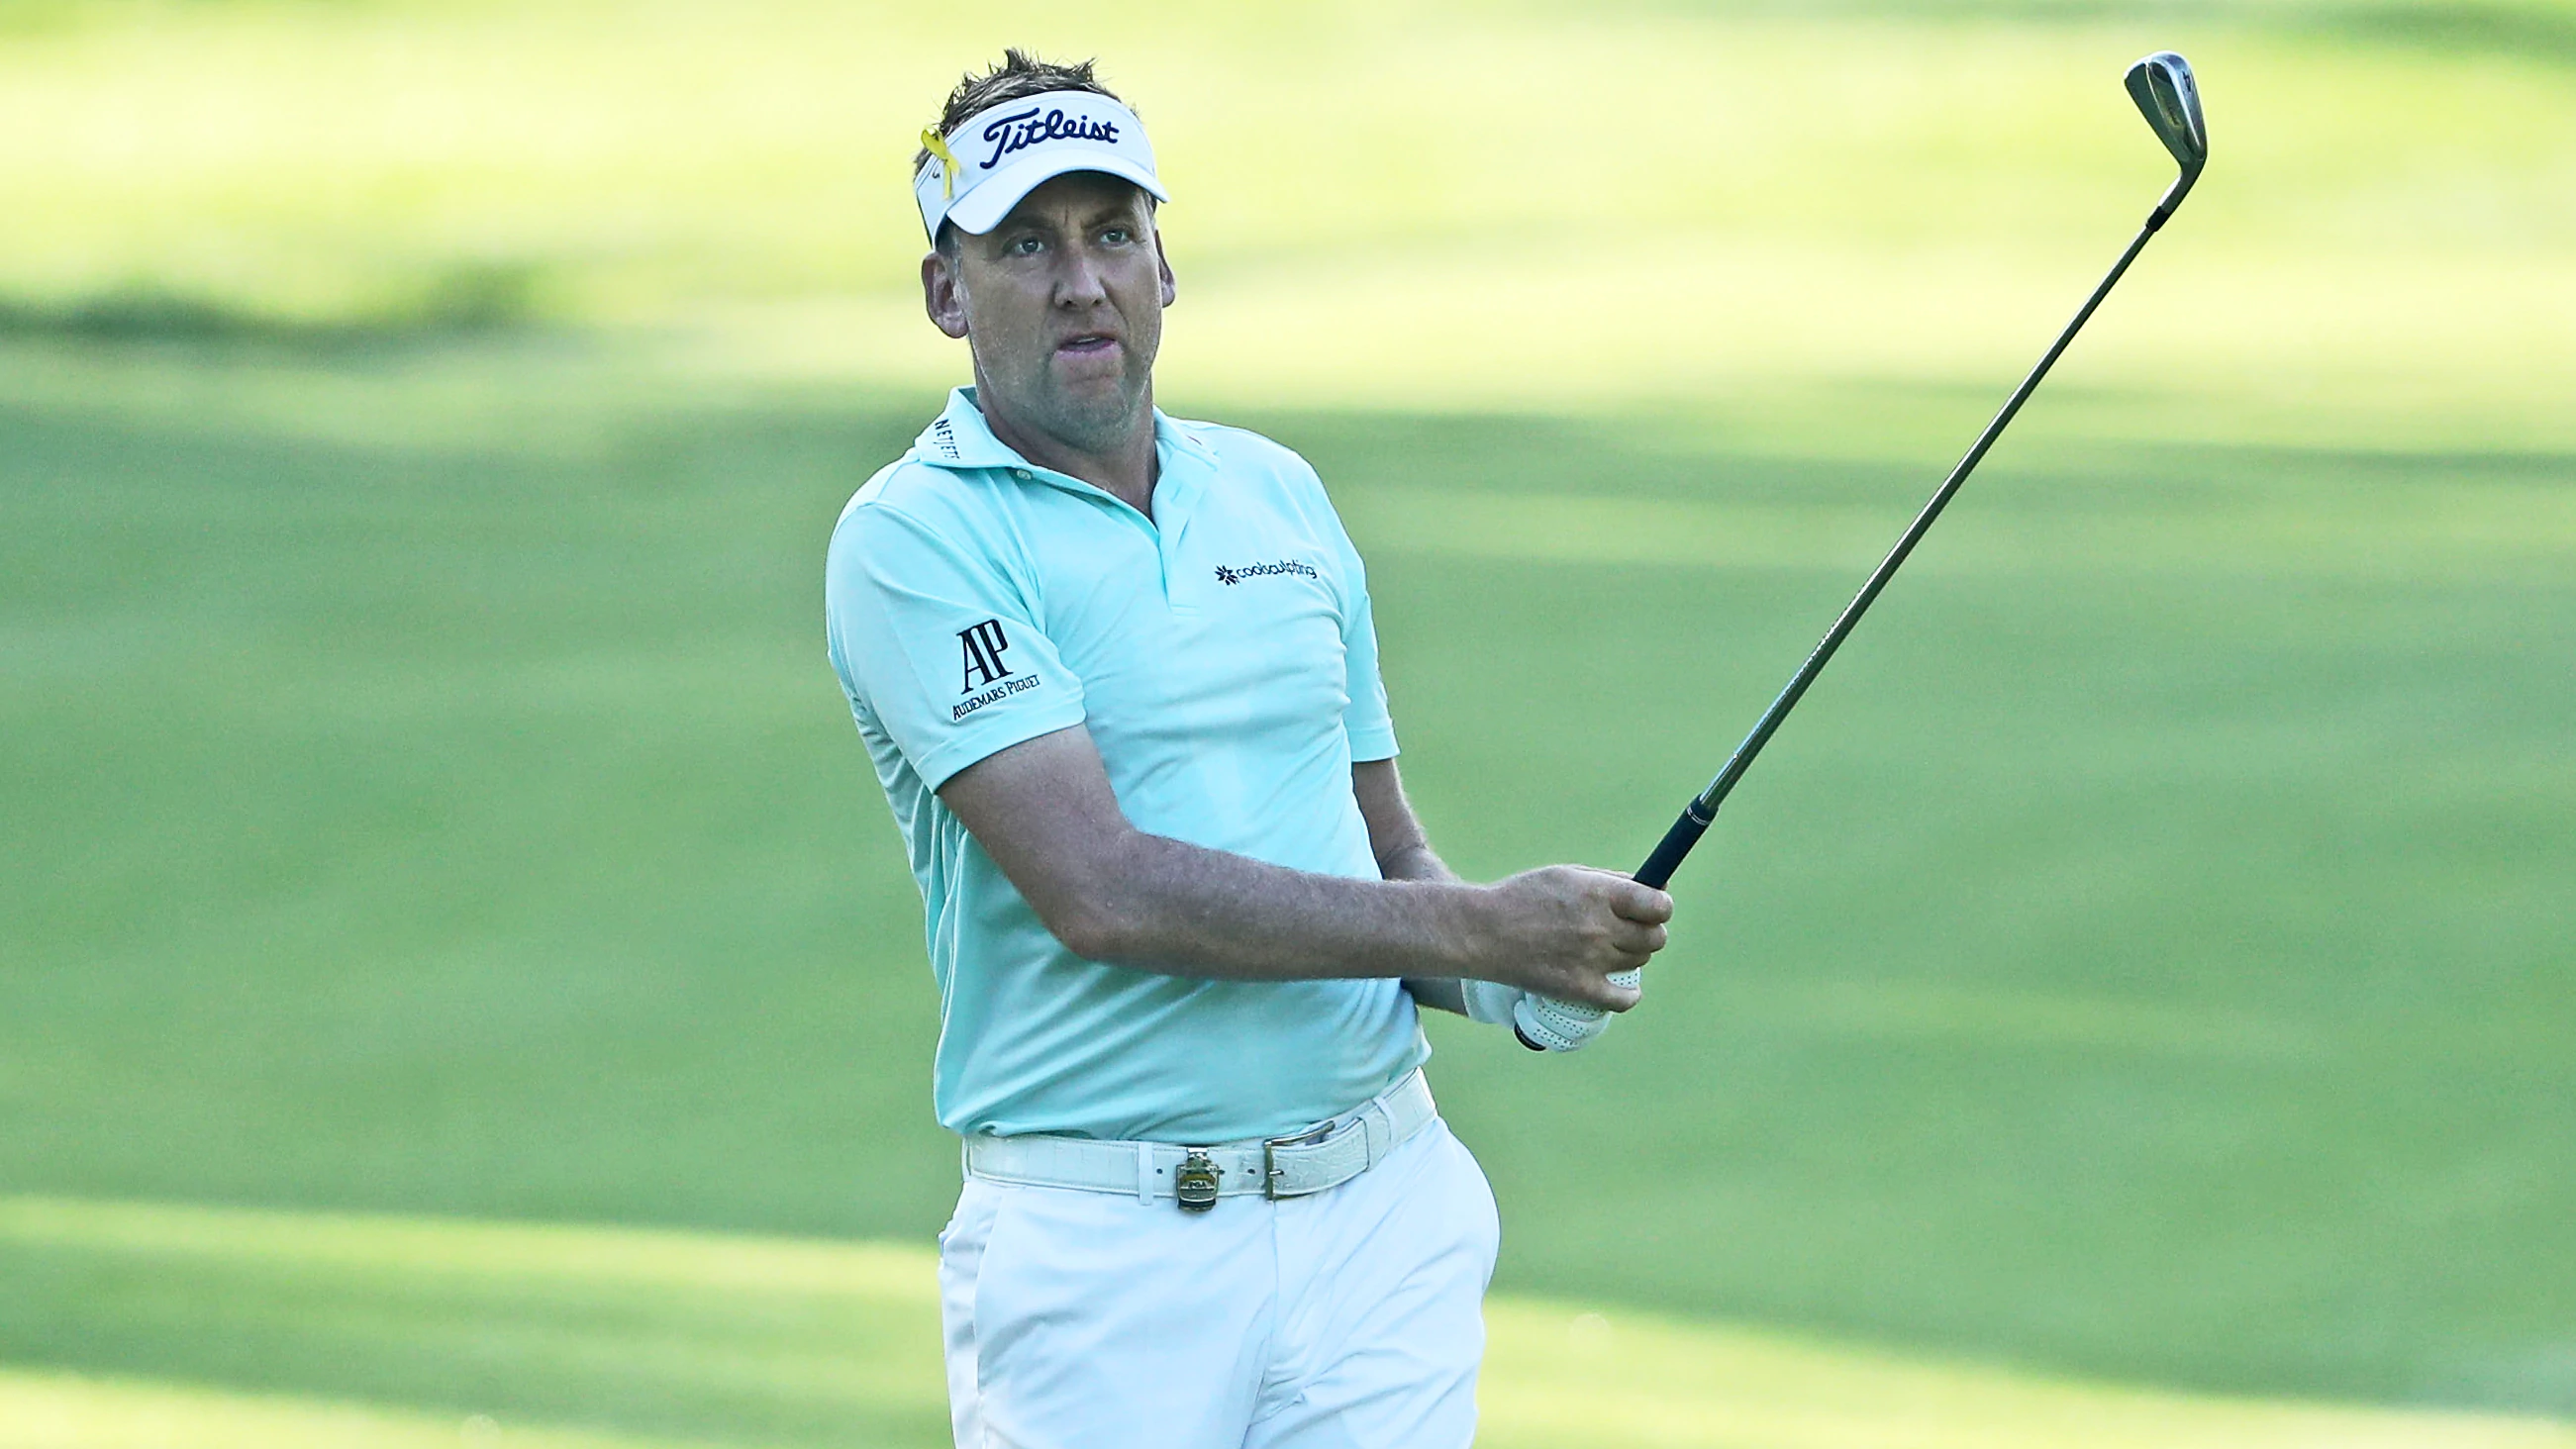 Who needs prep? Poulter opens with Thursday 67